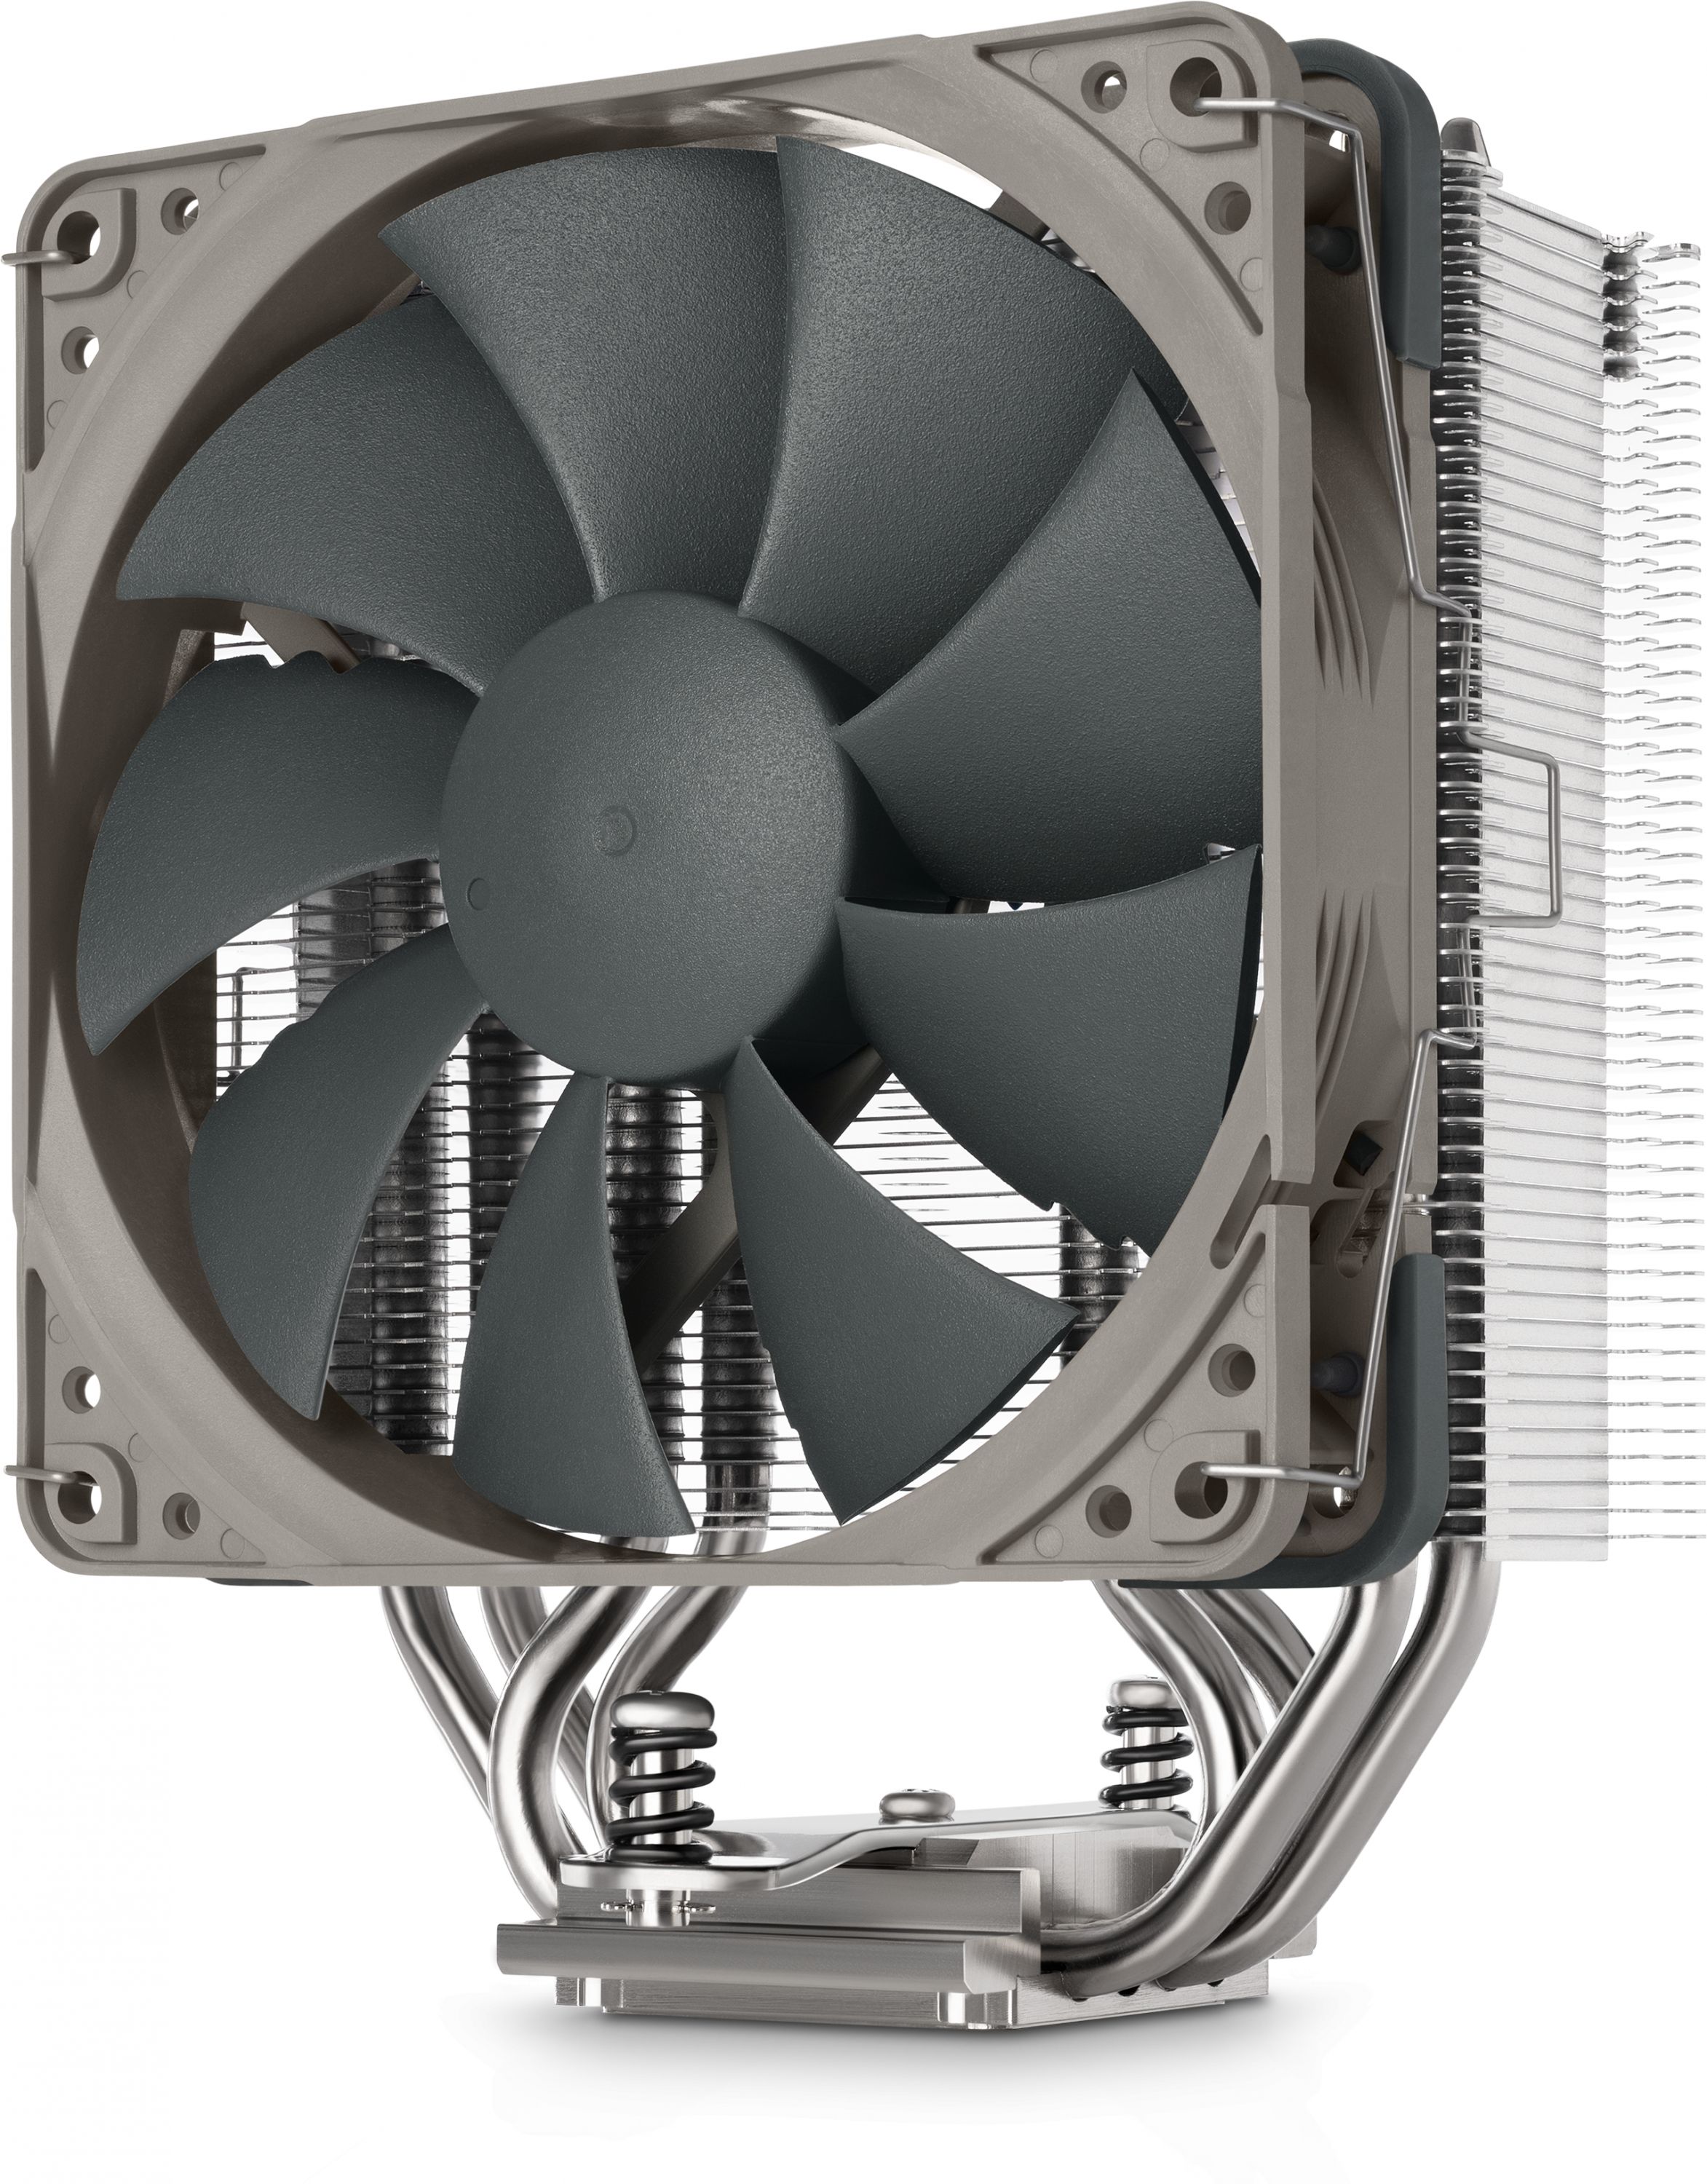 NH-U12A Premium 120mm CPU Cooler with two Quiet NF-A12x25 PWM Fans